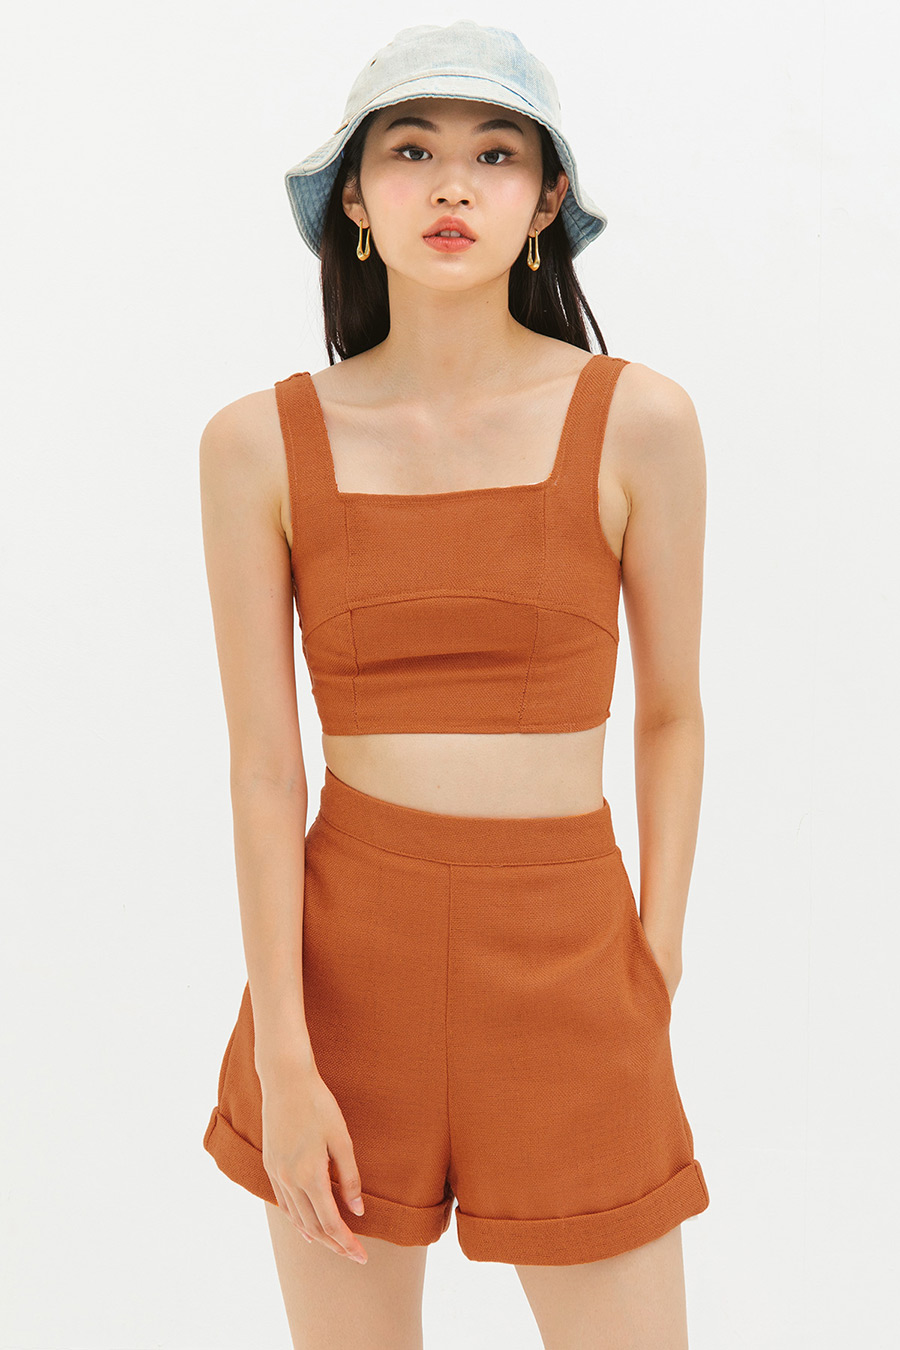 *SALE* WHEATON TOP - TERRACOTTA [BY MODPARADE]